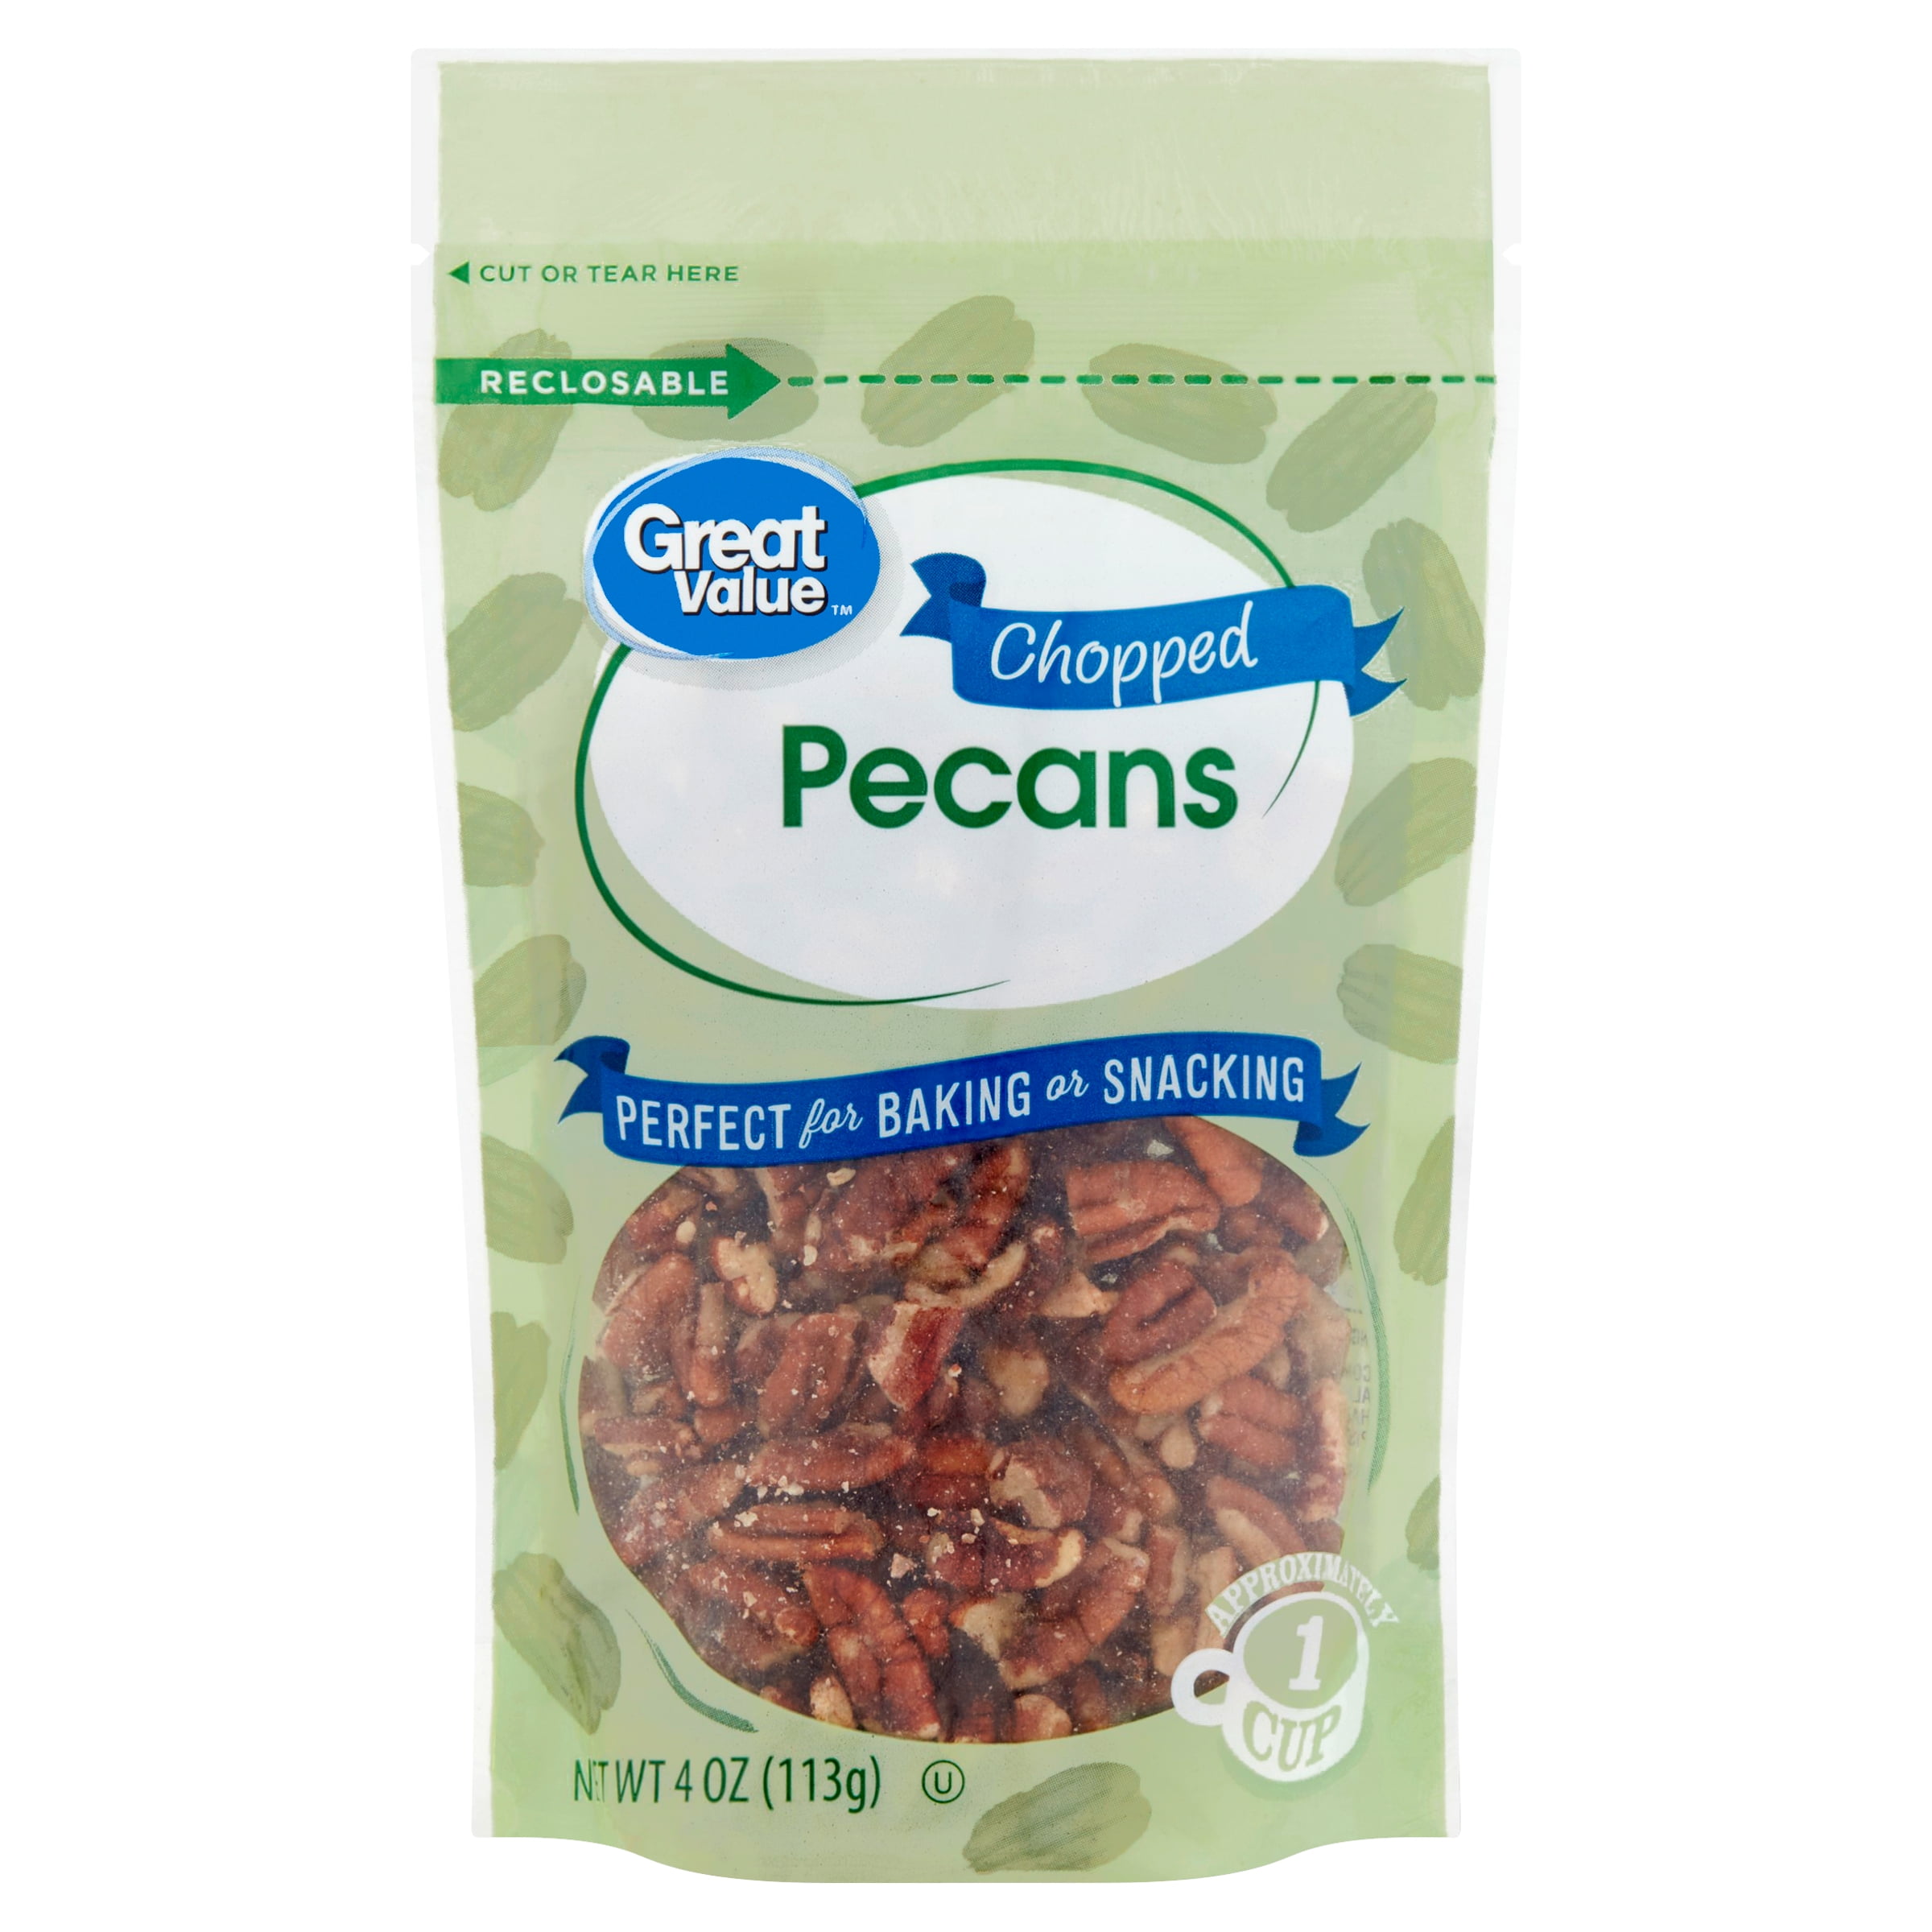 Great Value Chopped Pecans, 4 oz